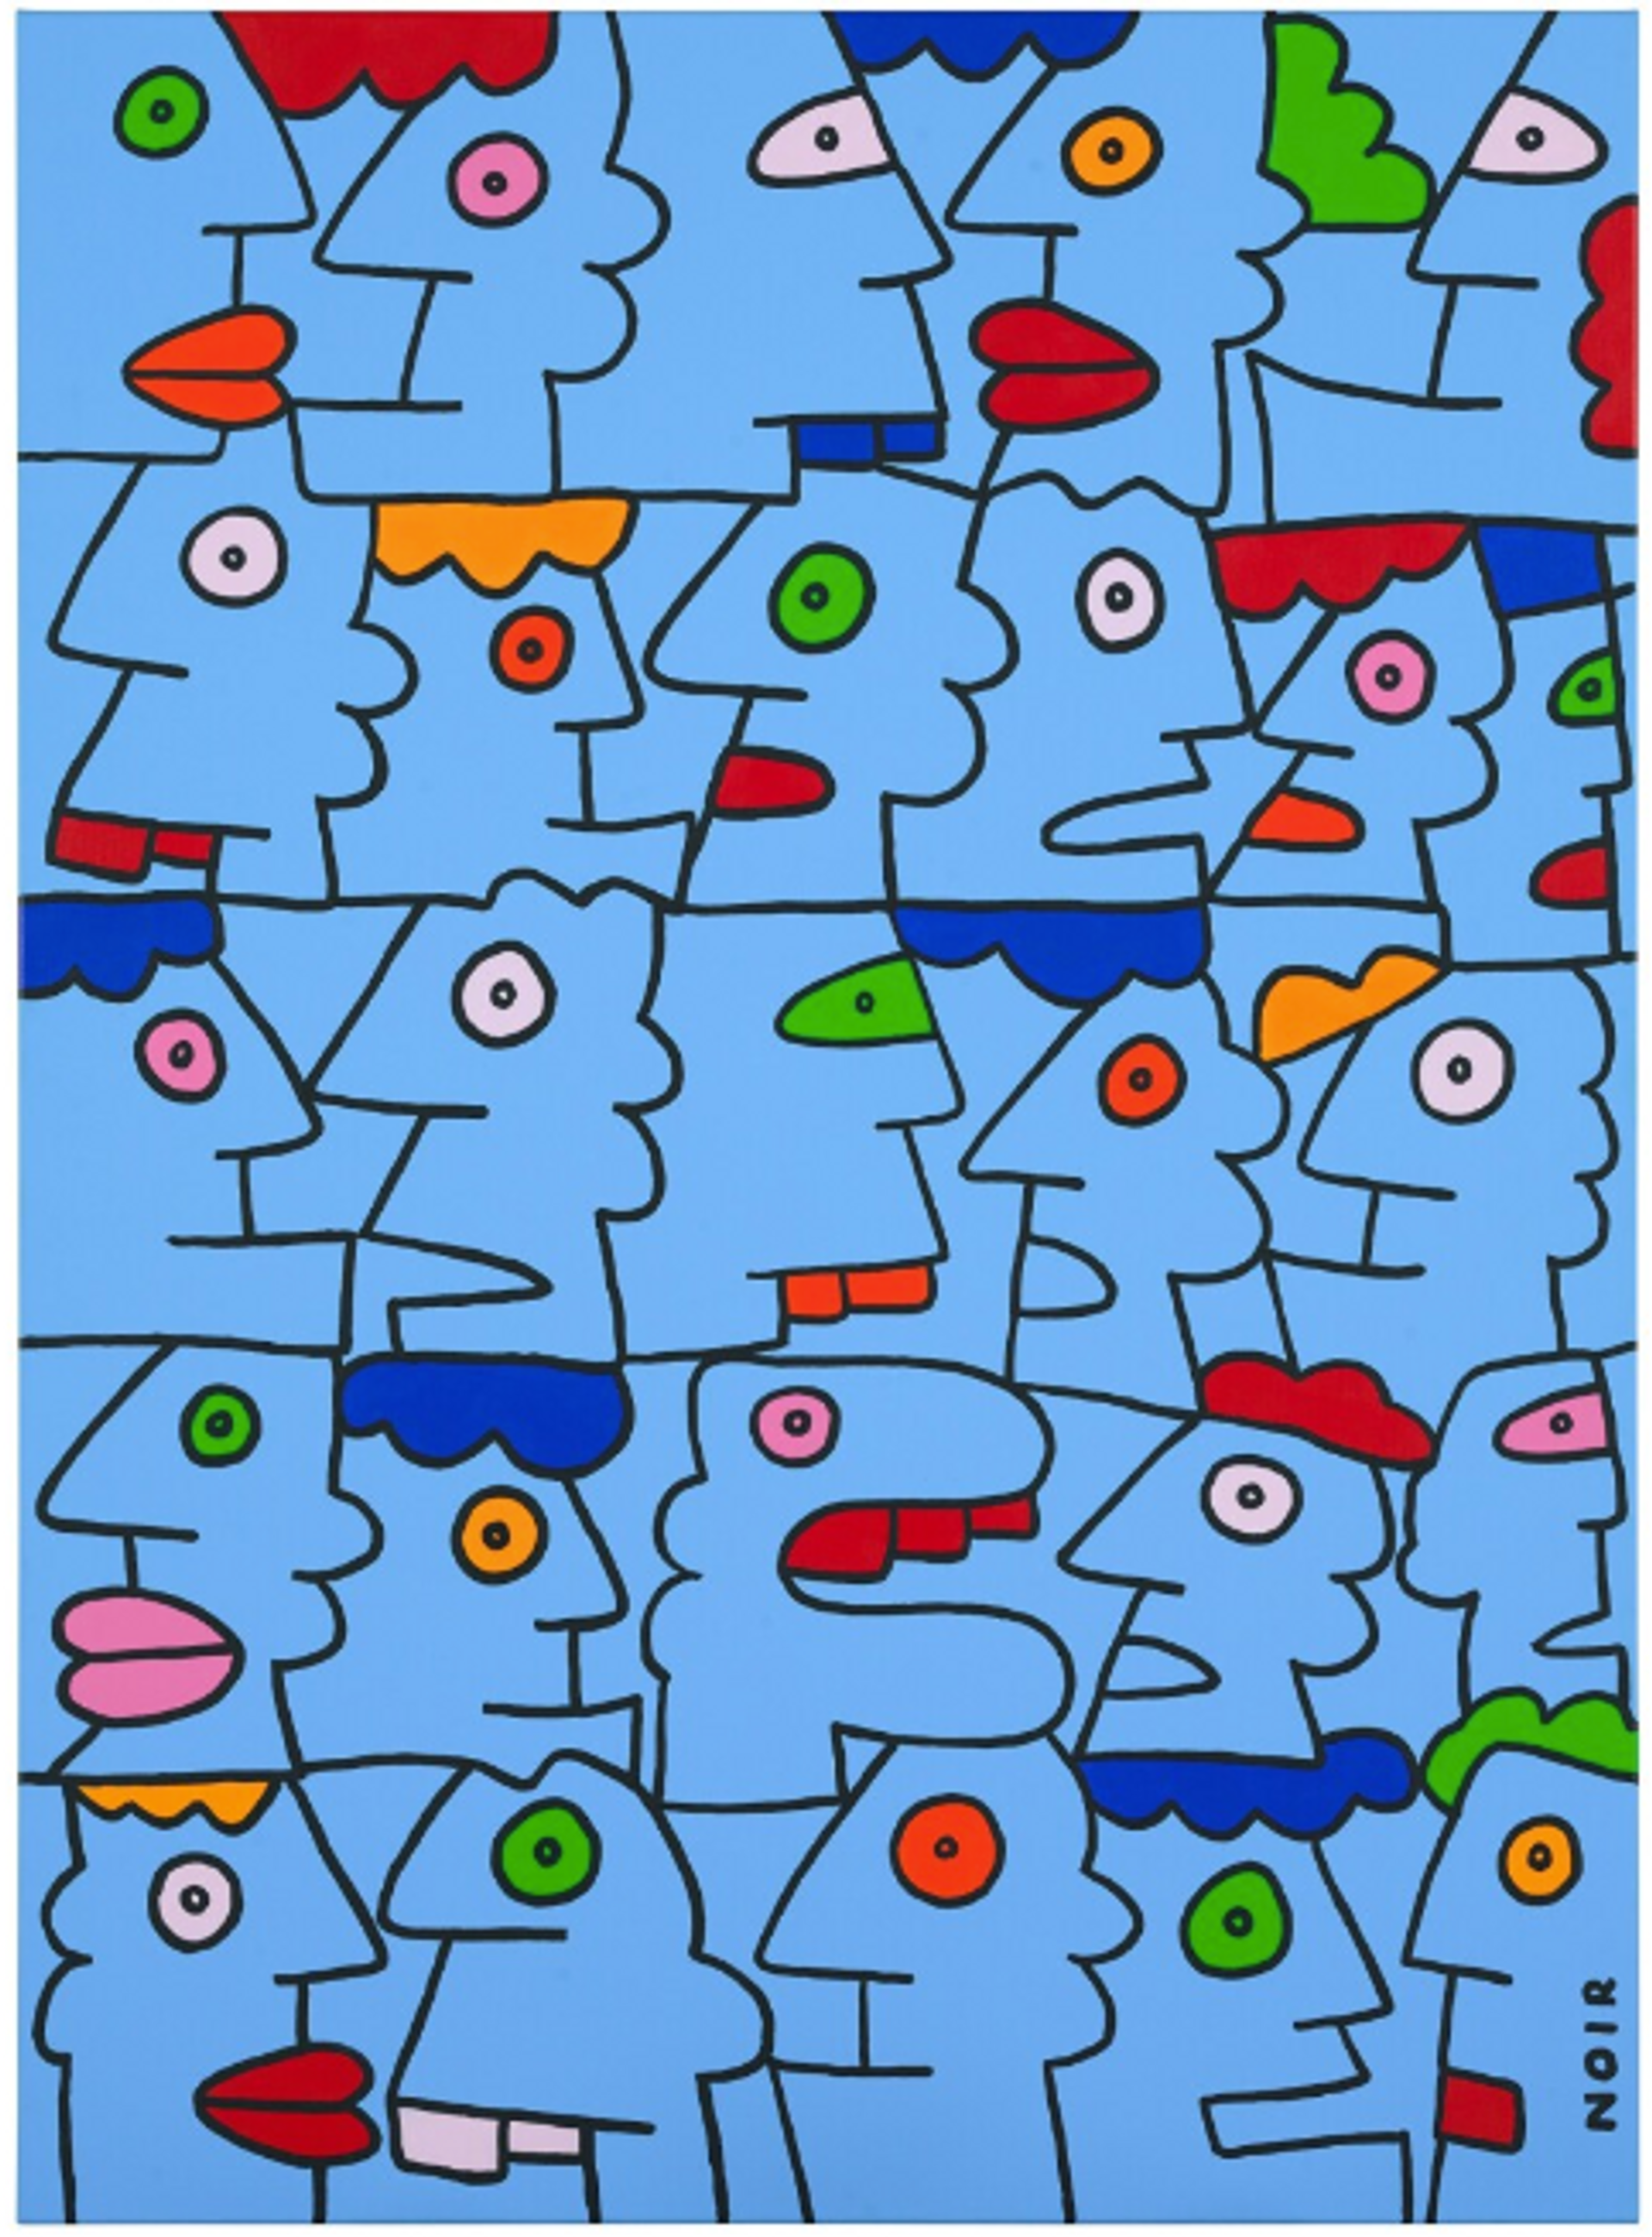 The Calm Sky Over the Pedestrian Street Makes Me Want To Walk Straight To The Shopping Mall by Thierry Noir - Sotheby's 2023